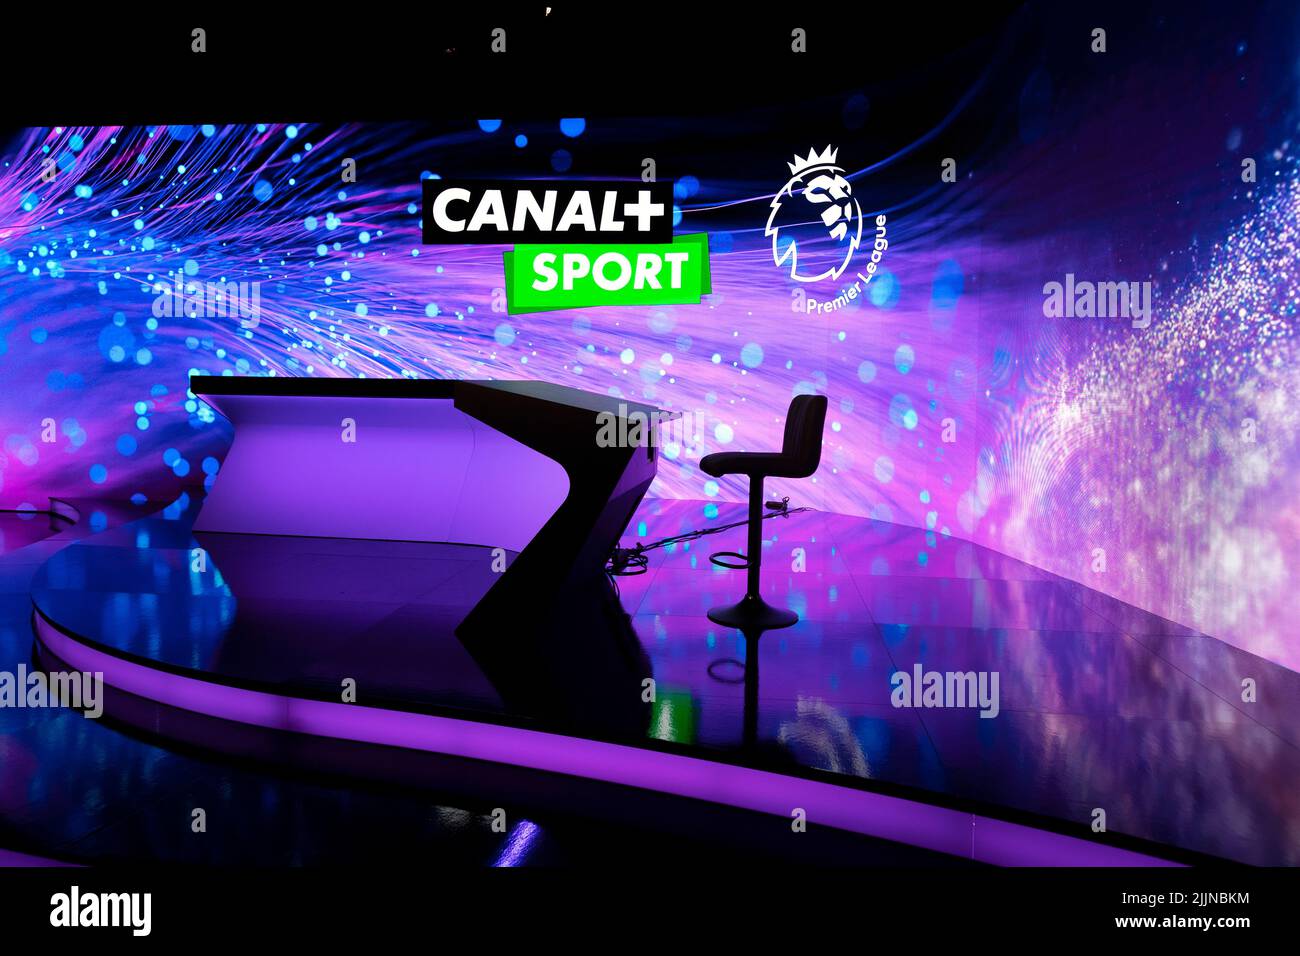 canal sport live